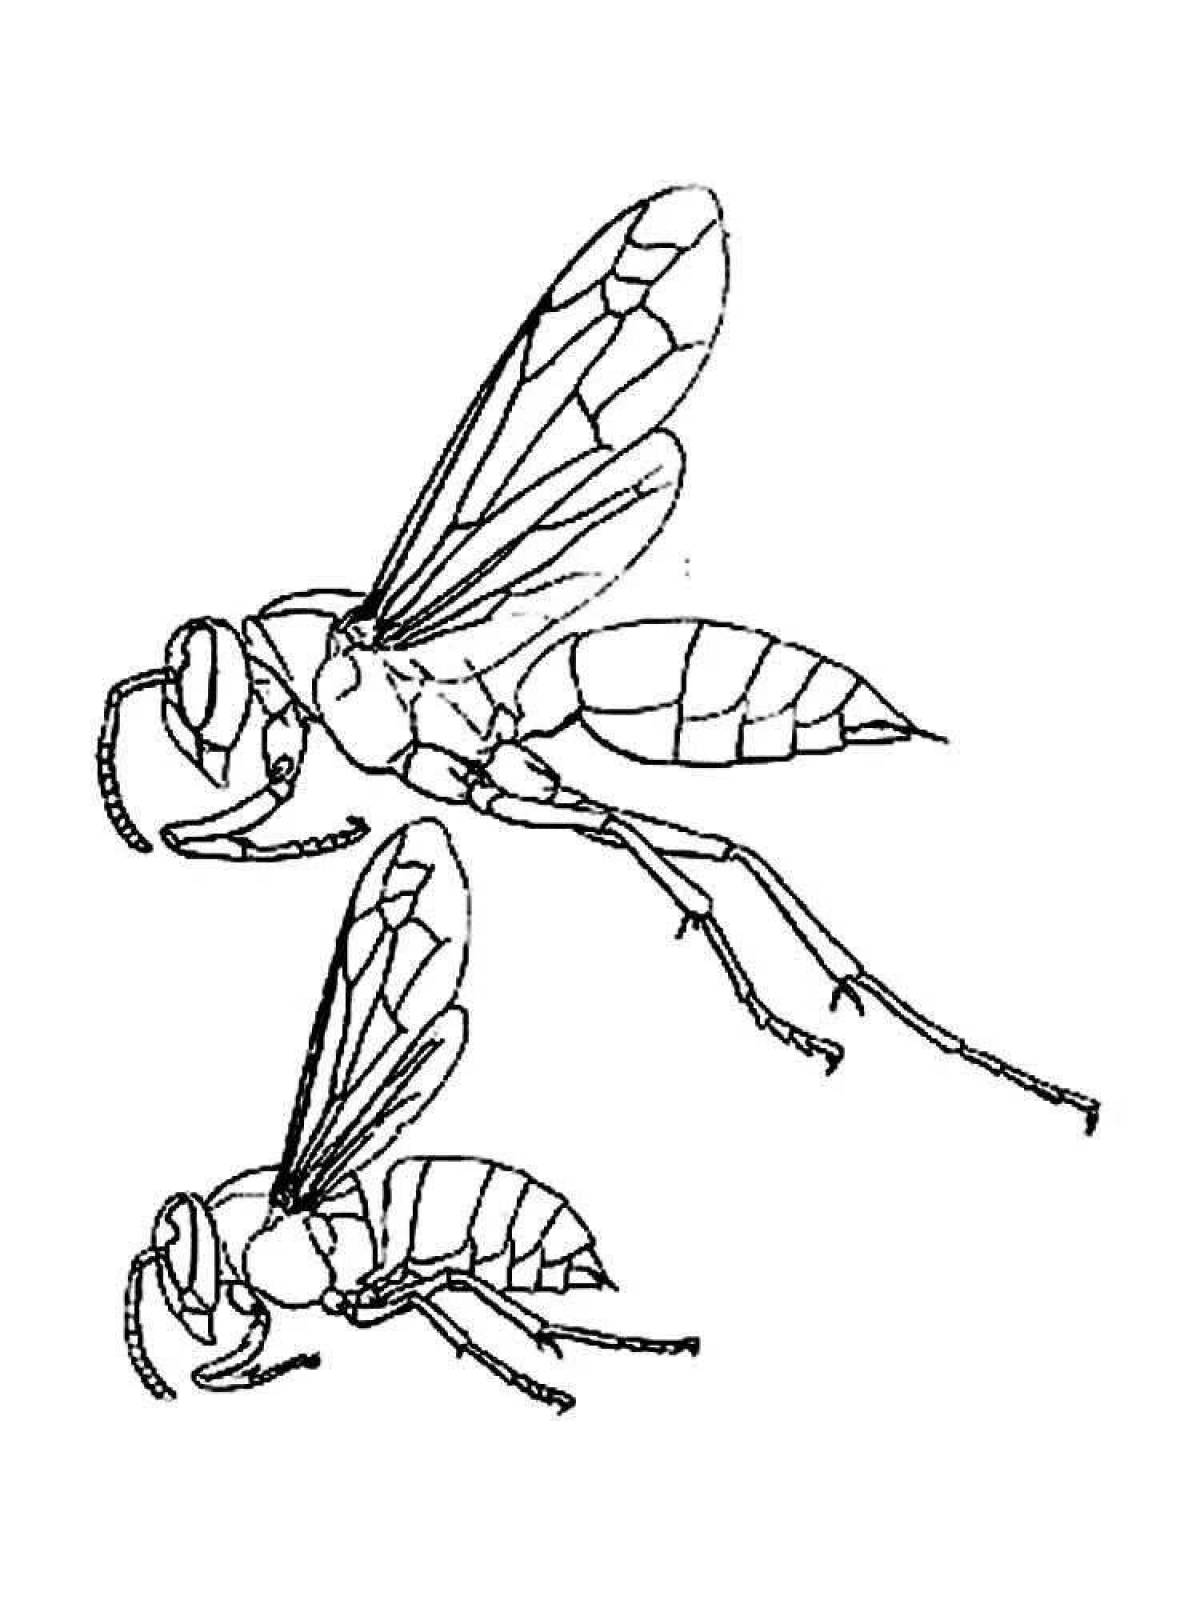 Wasp fun coloring for kids